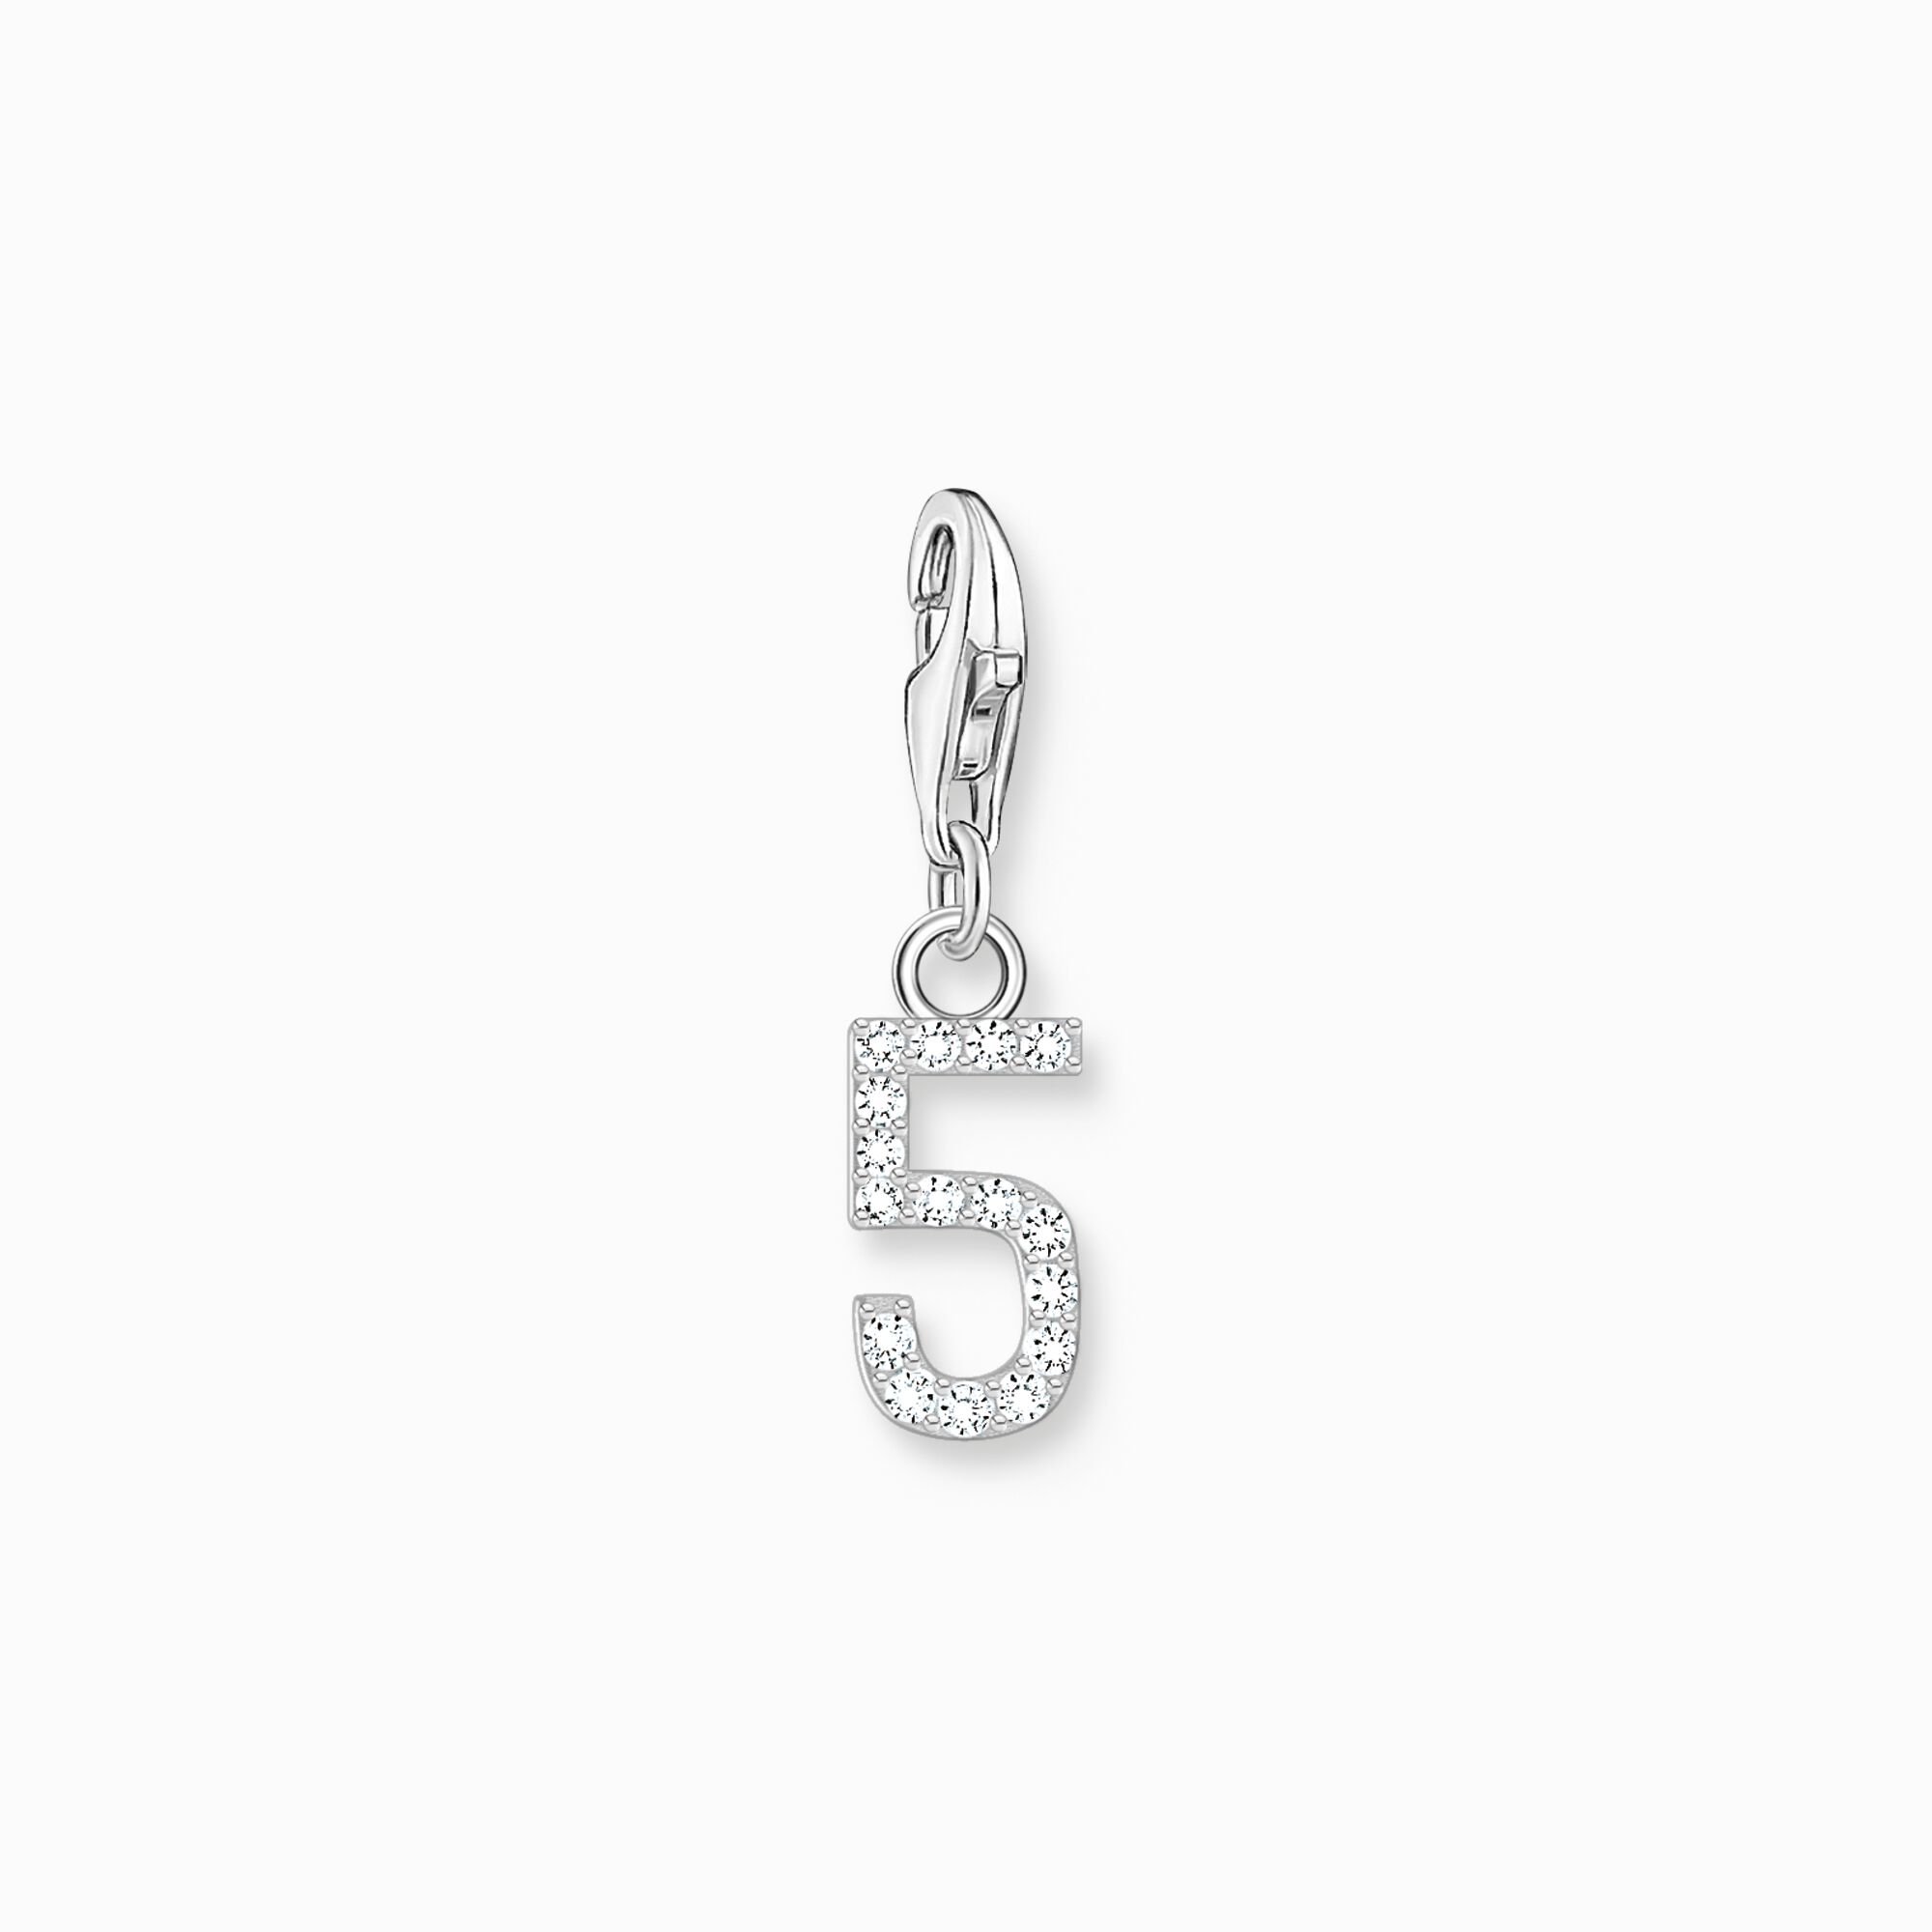 Silver charm pendant number 5 with zirconia from the Charm Club collection in the THOMAS SABO online store